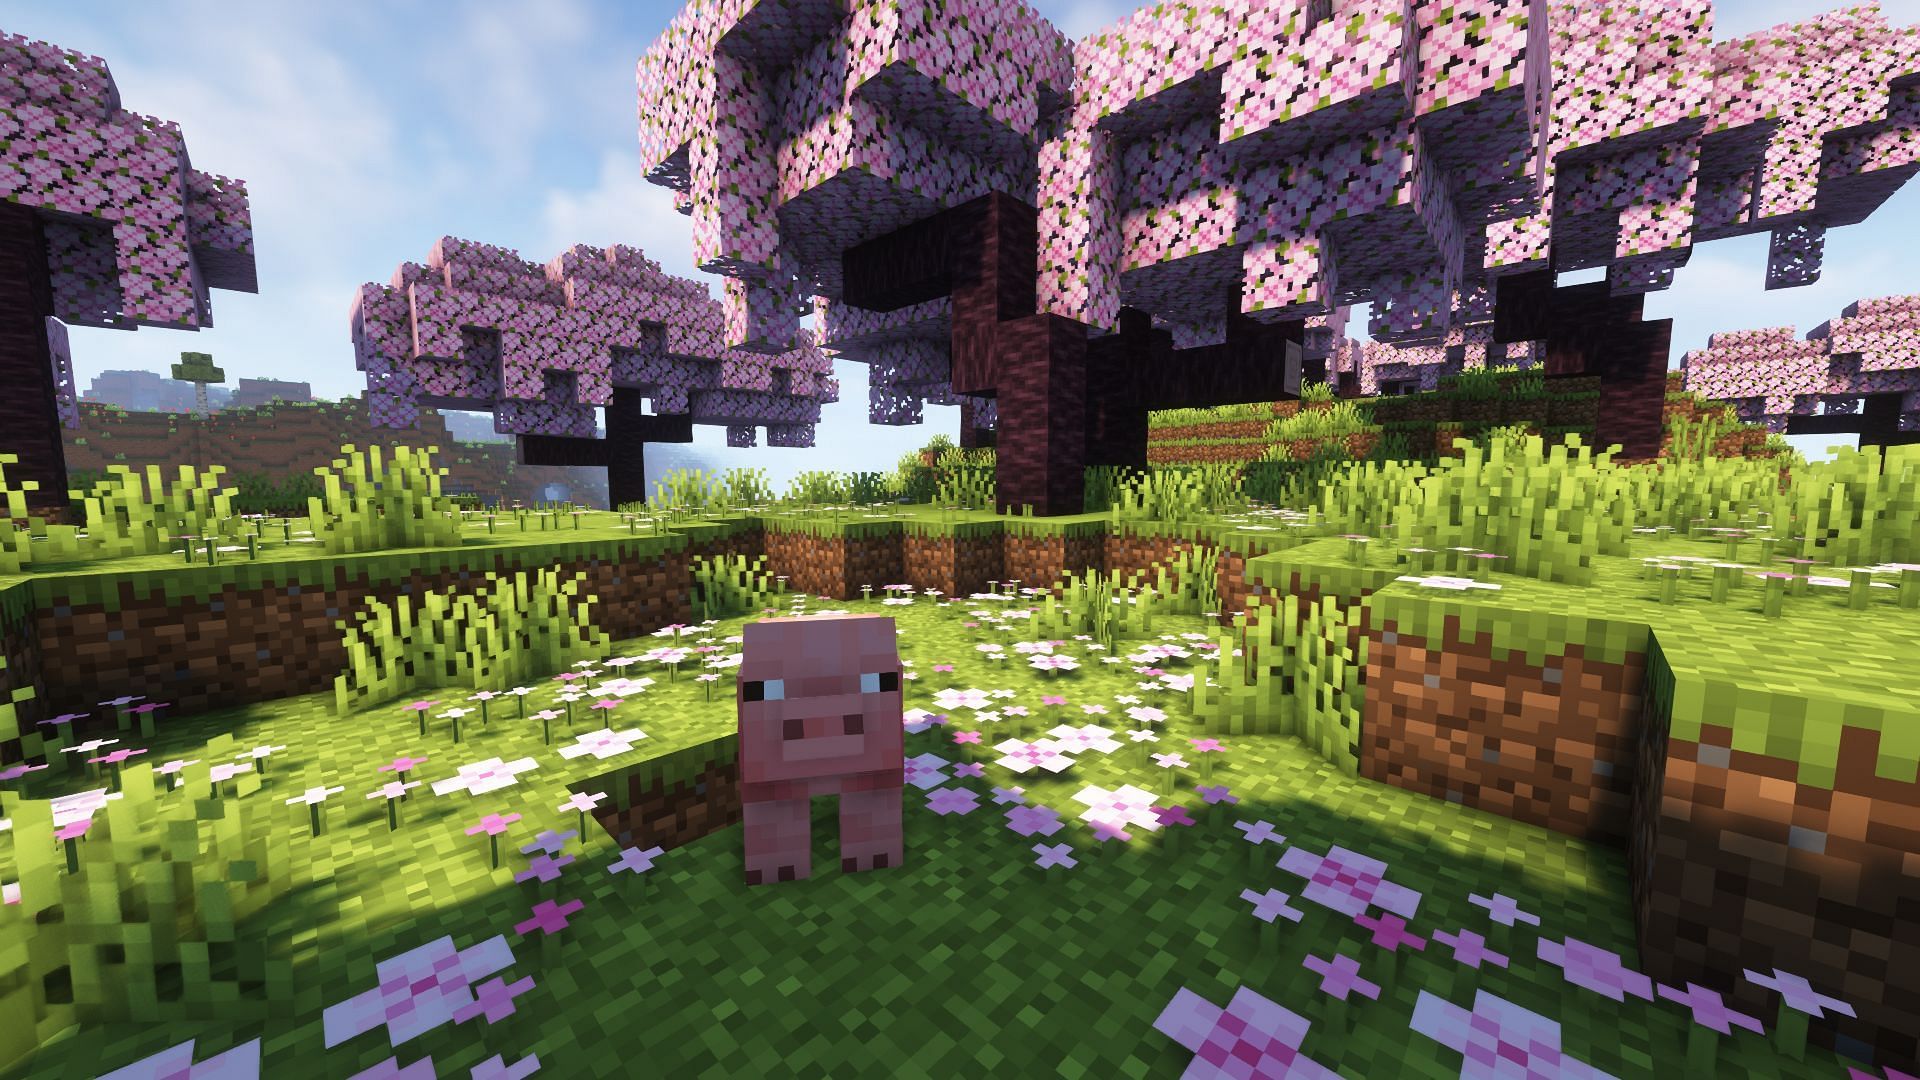 Minecraft 1.20 Shaders for the Trails & Tales Update